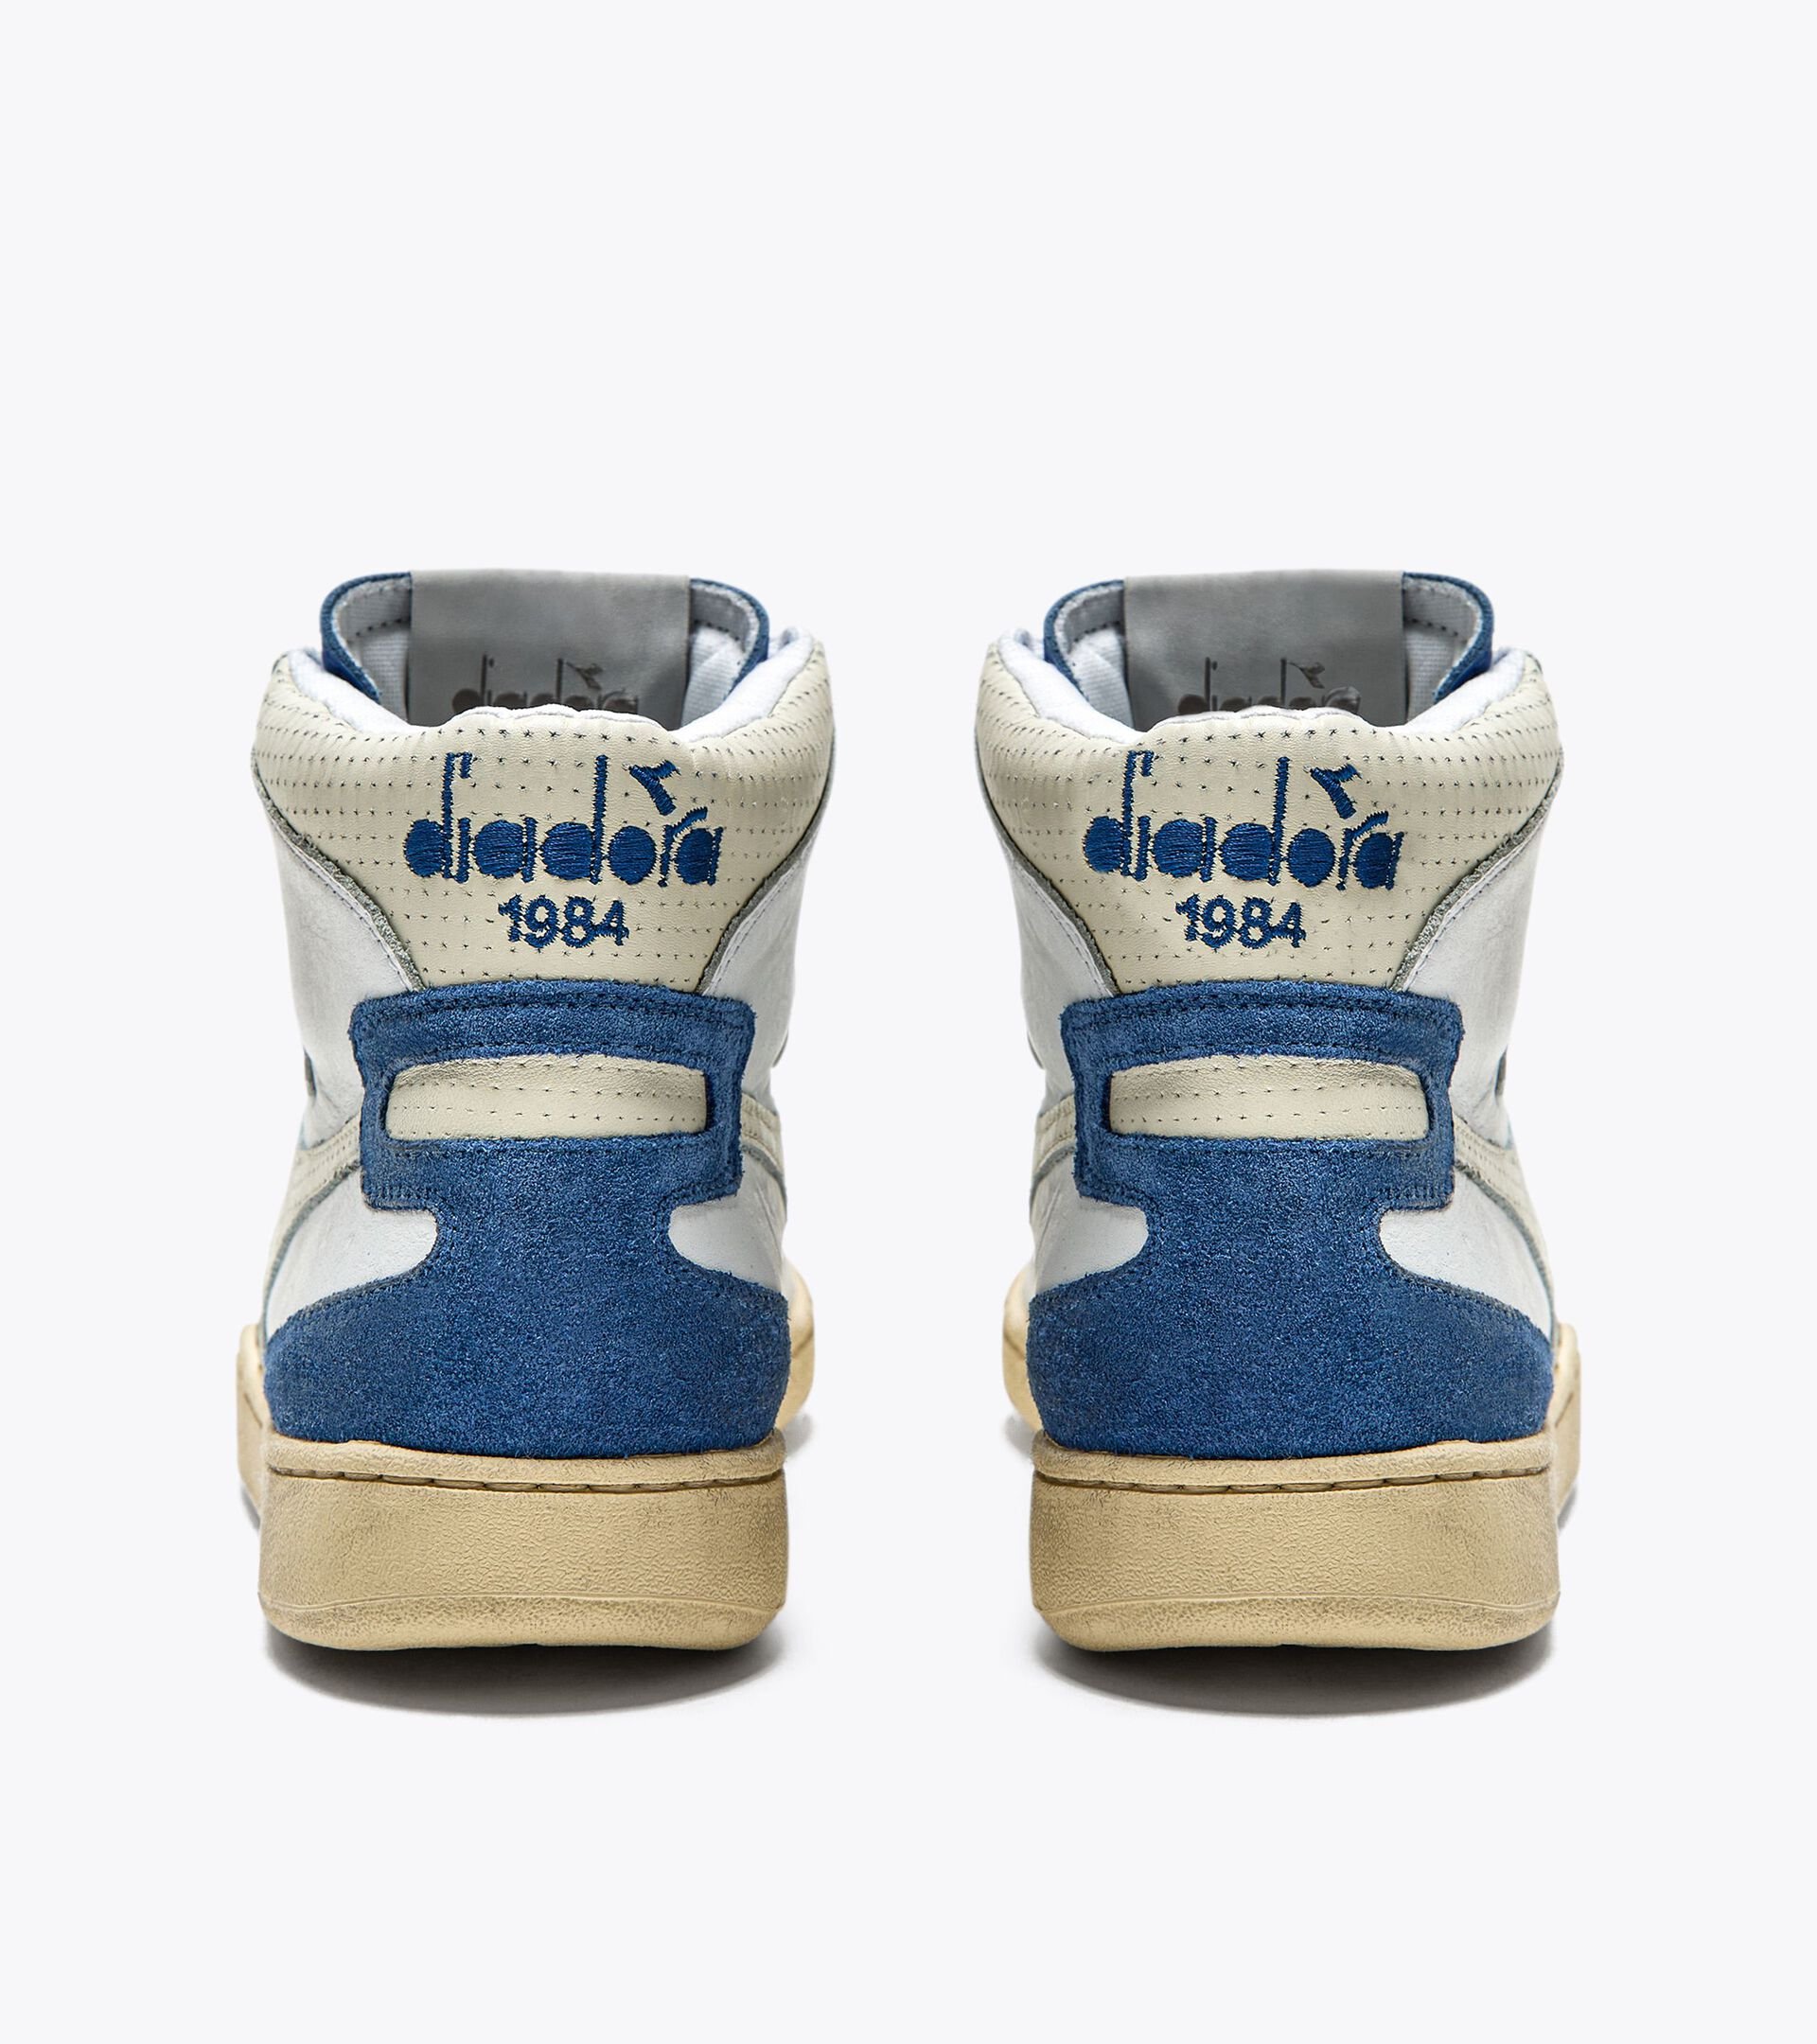 Chaussures Heritage - Made in Italy - Gender neutral MI BASKET PUNCHED ITA X DINO MENEGHIN BLC/BLEU DELFT - Diadora